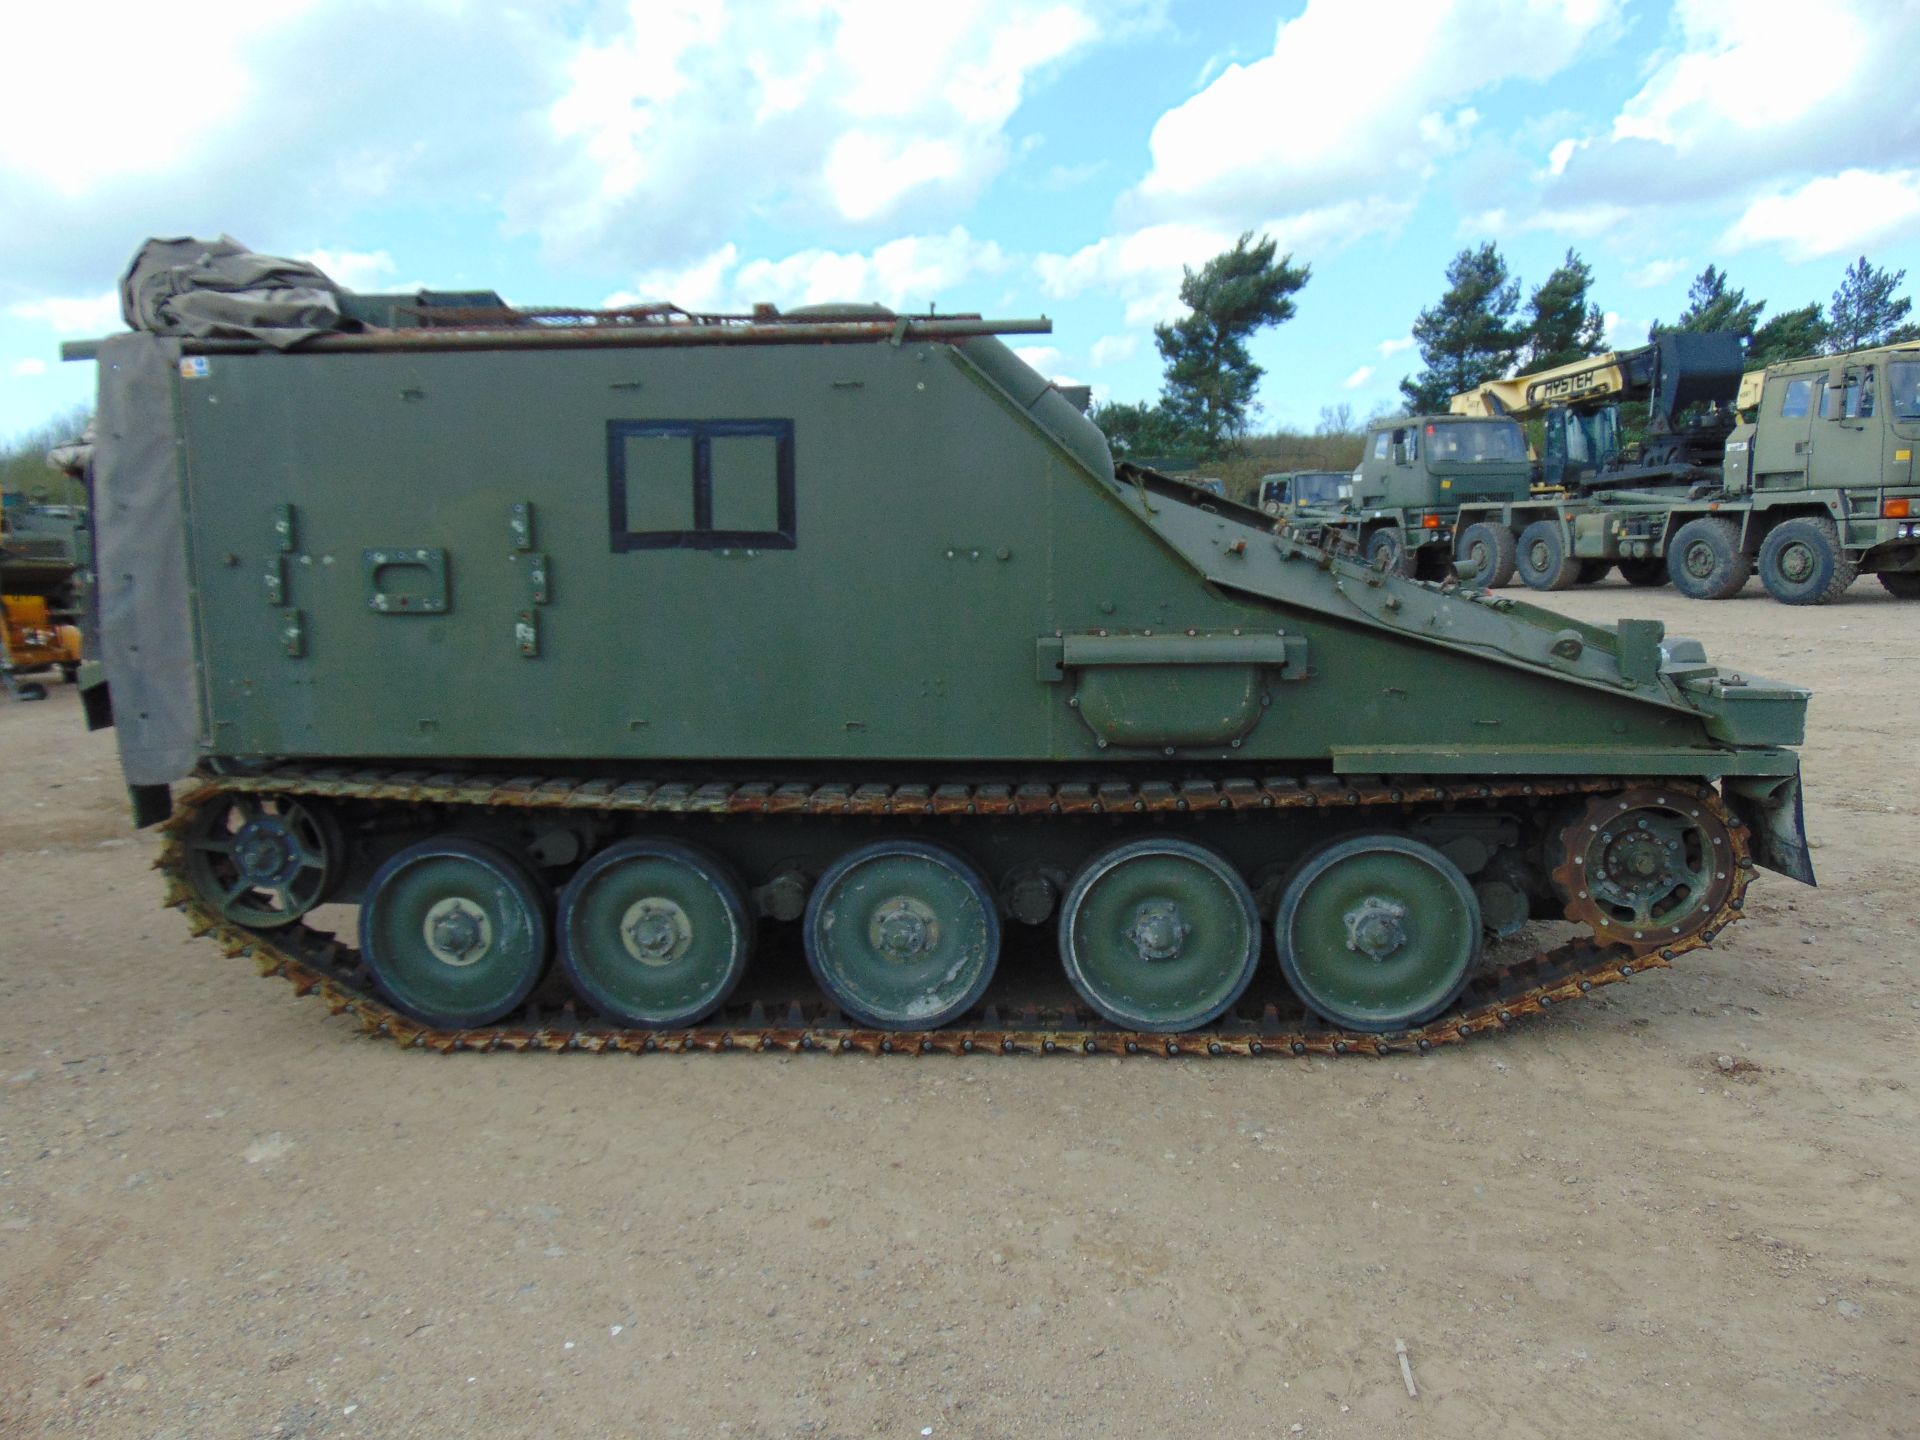 CVRT (Combat Vehicle Reconnaissance Tracked) FV105 Sultan Armoured Personnel Carrier - Image 8 of 25